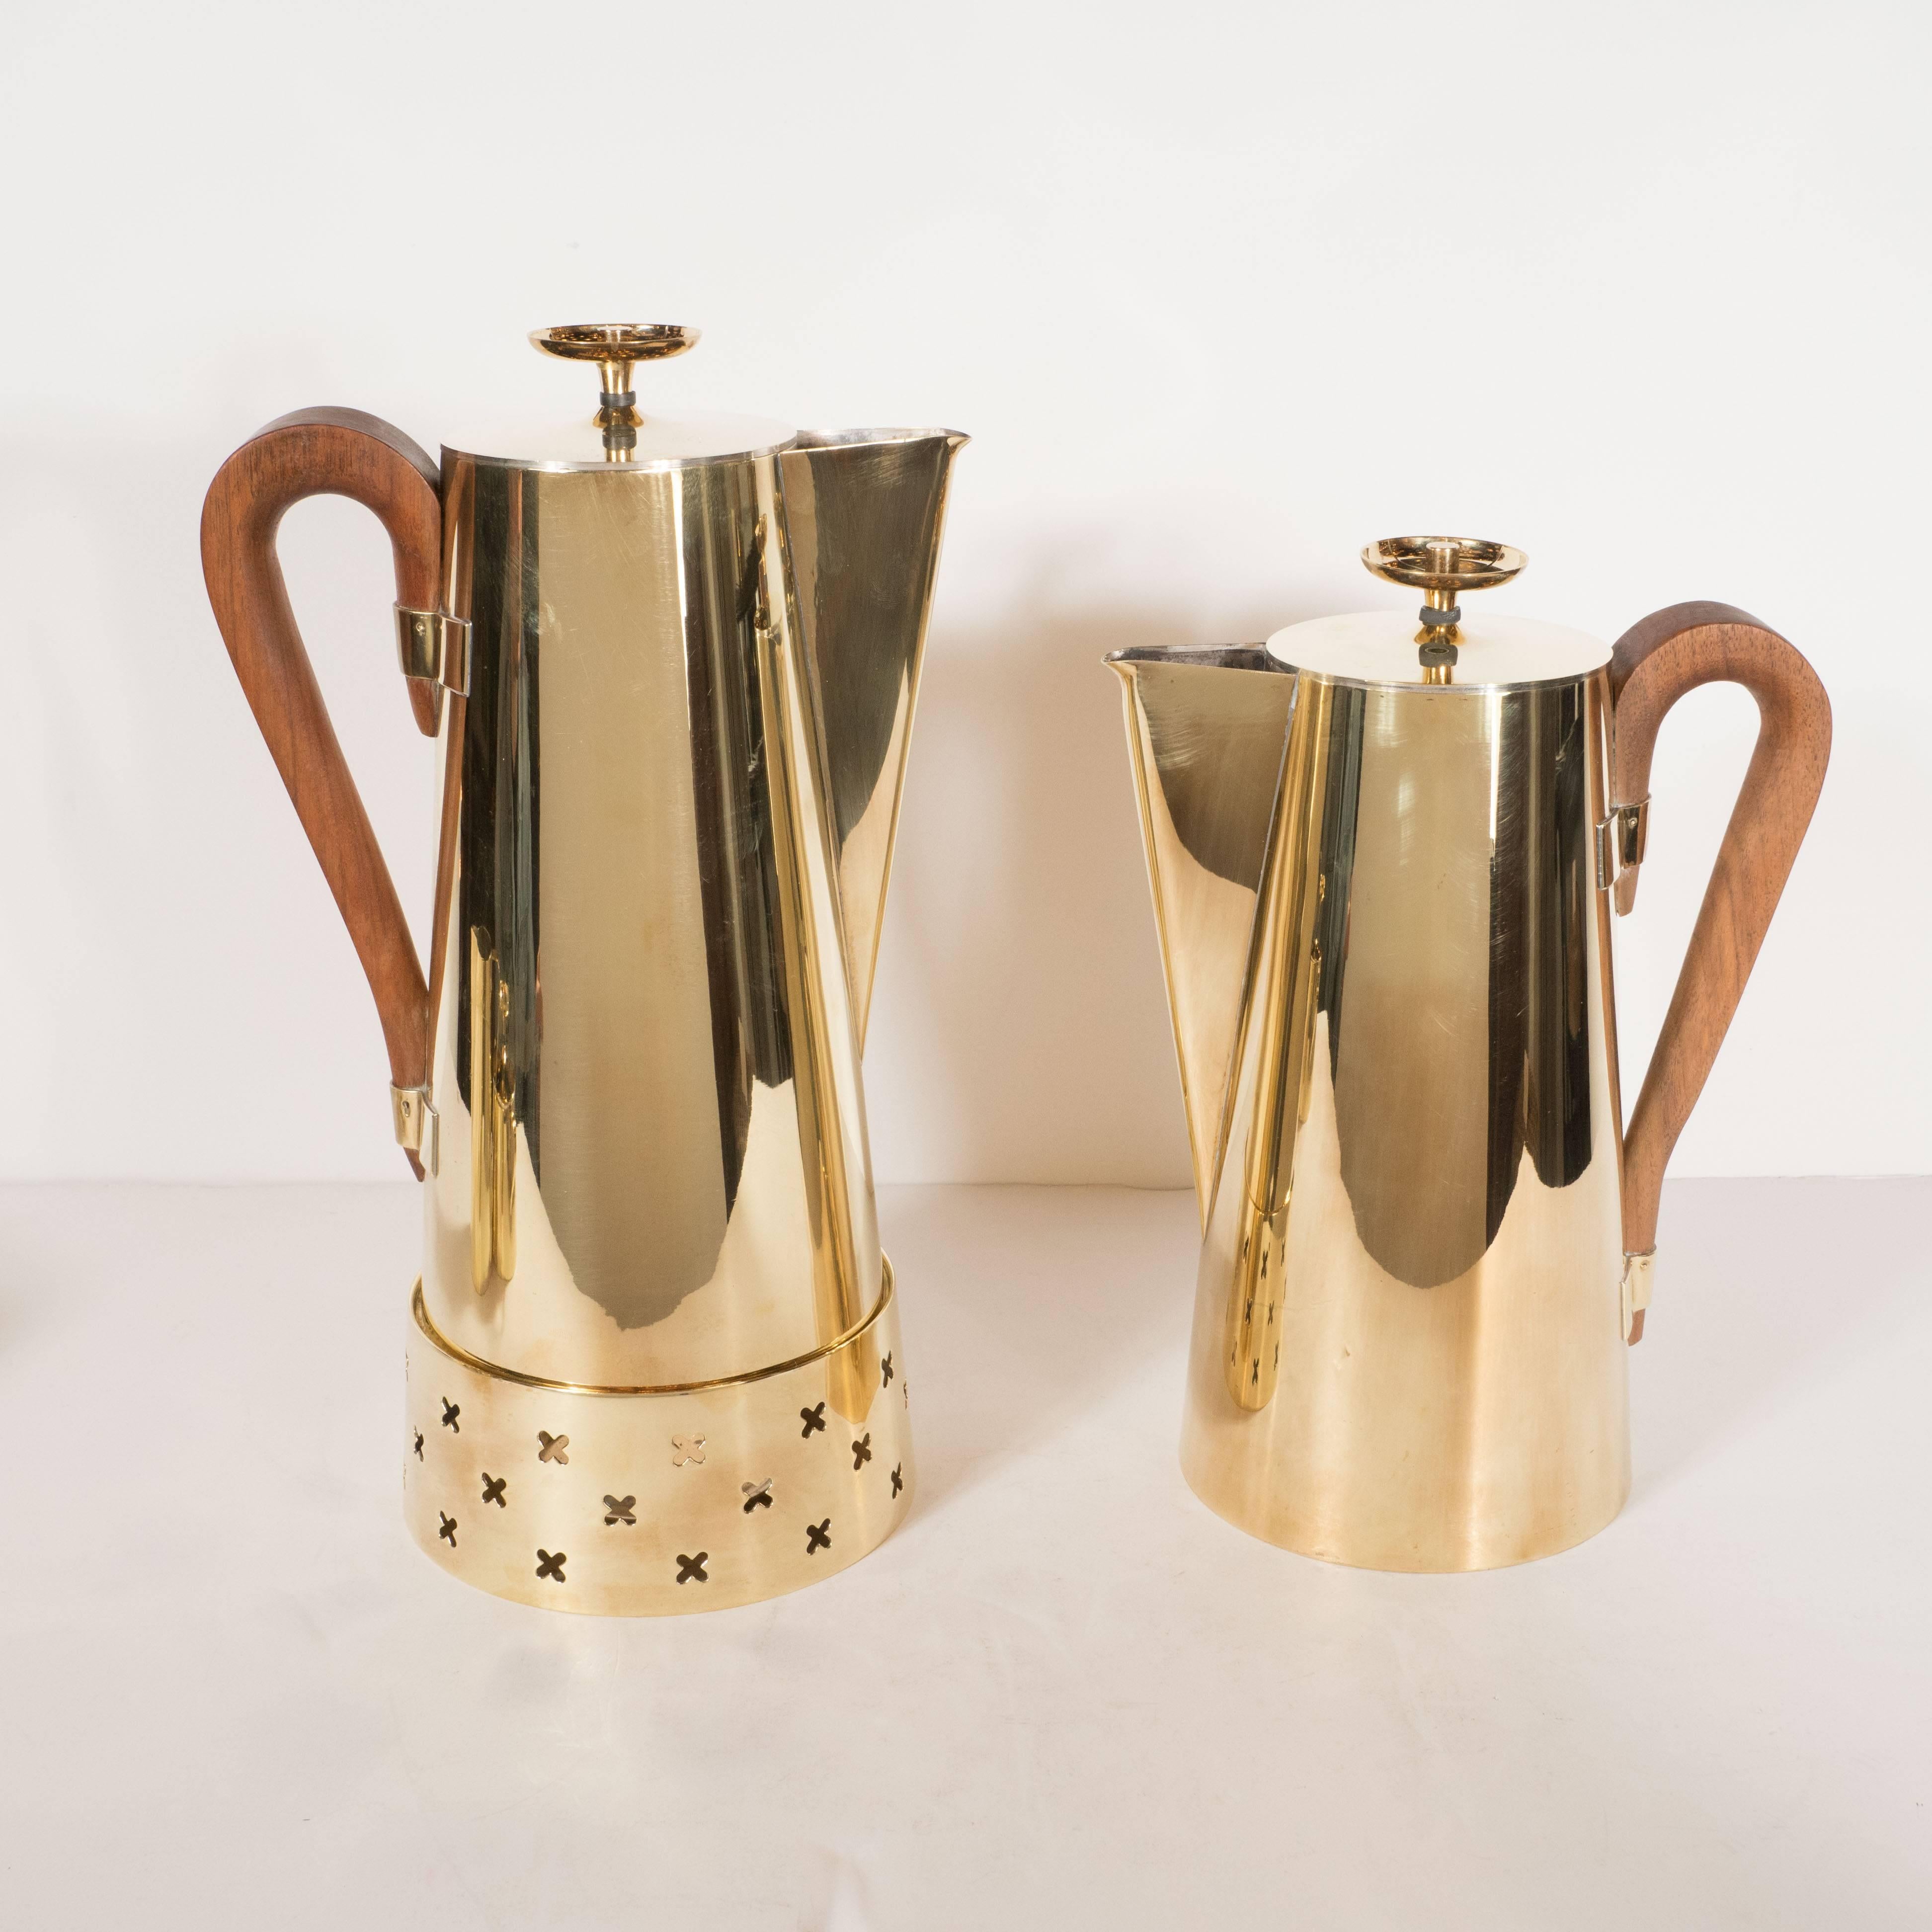 This gorgeous coffee or tea service set was designed by Tommi Parzinger, among the most celebrated Mid-Century Modernist designers, for Dorlyn Silversmiths. The set includes one large coffee pot, one medium tea pot, a creamer, and a sugar bowl with